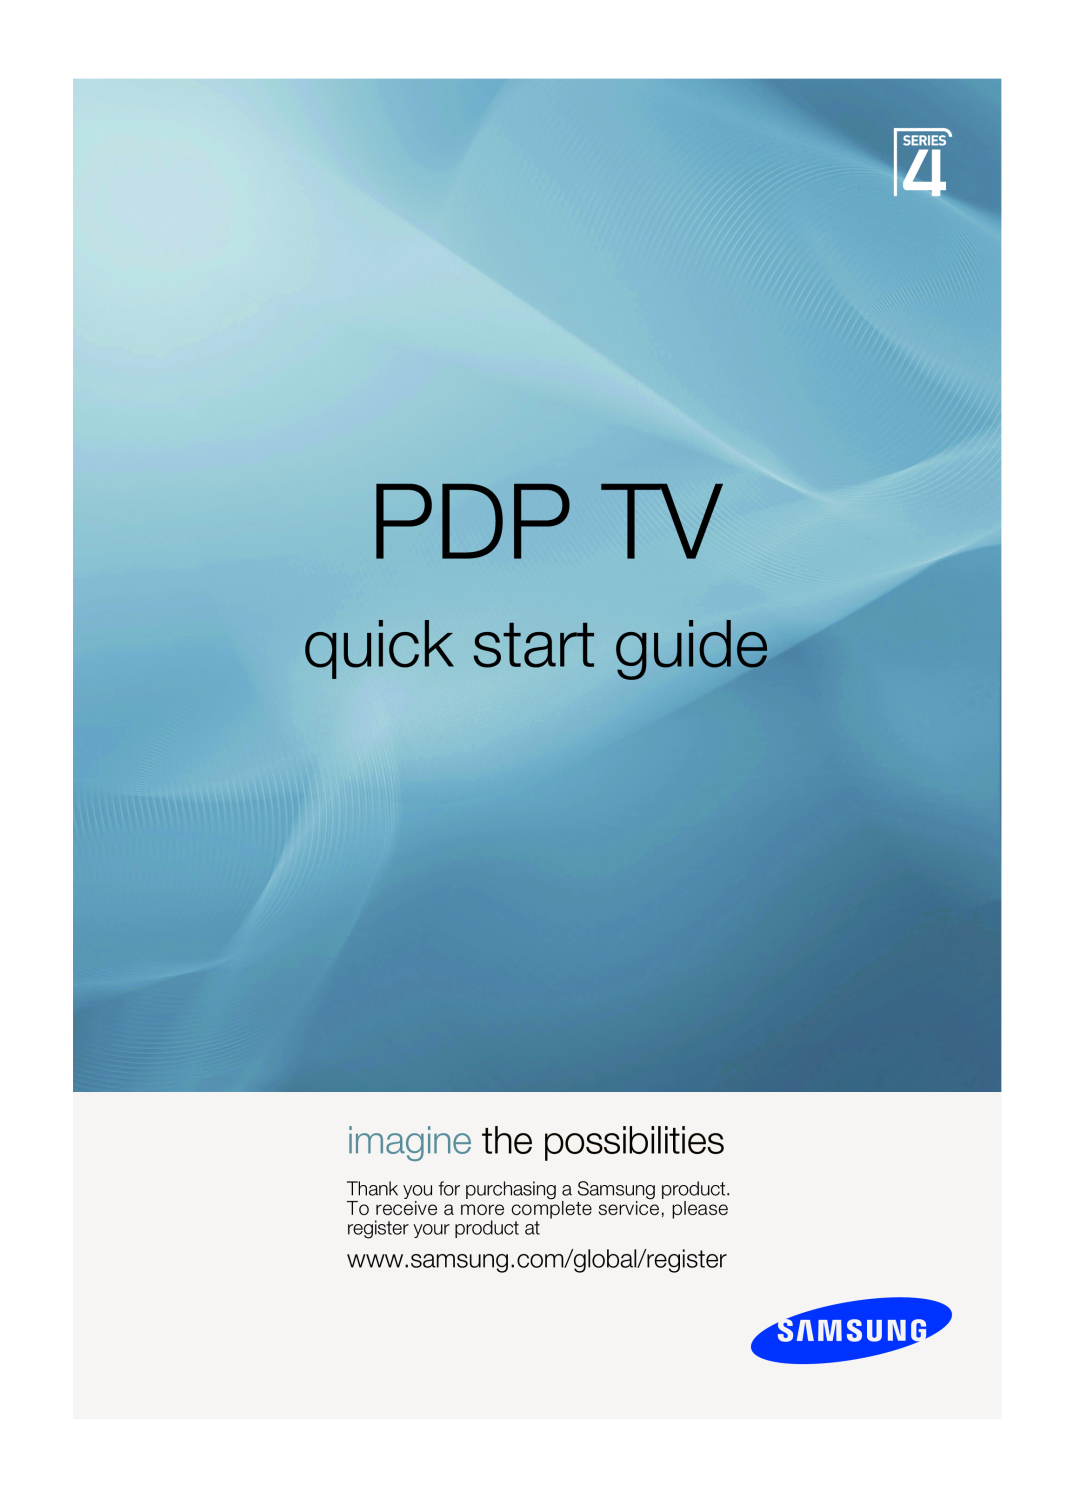 Samsung PL50A450P1 quick start Pdp Tv, quick start guide, imagine the possibilities 